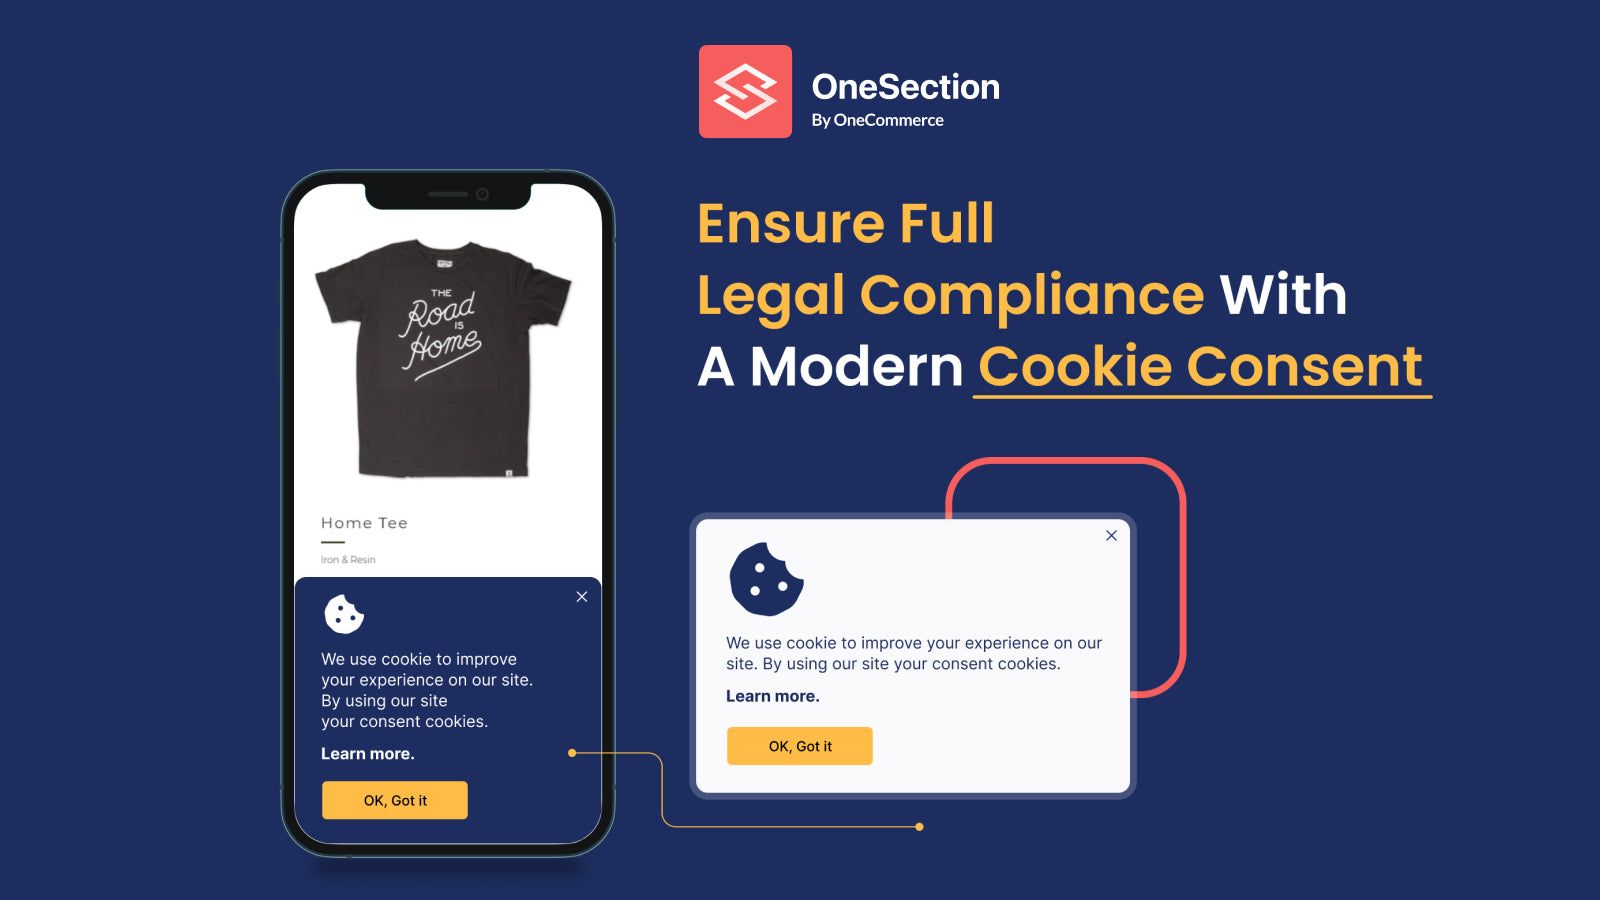 Ensure Full Legal Compliance with a modern Cookie Consent